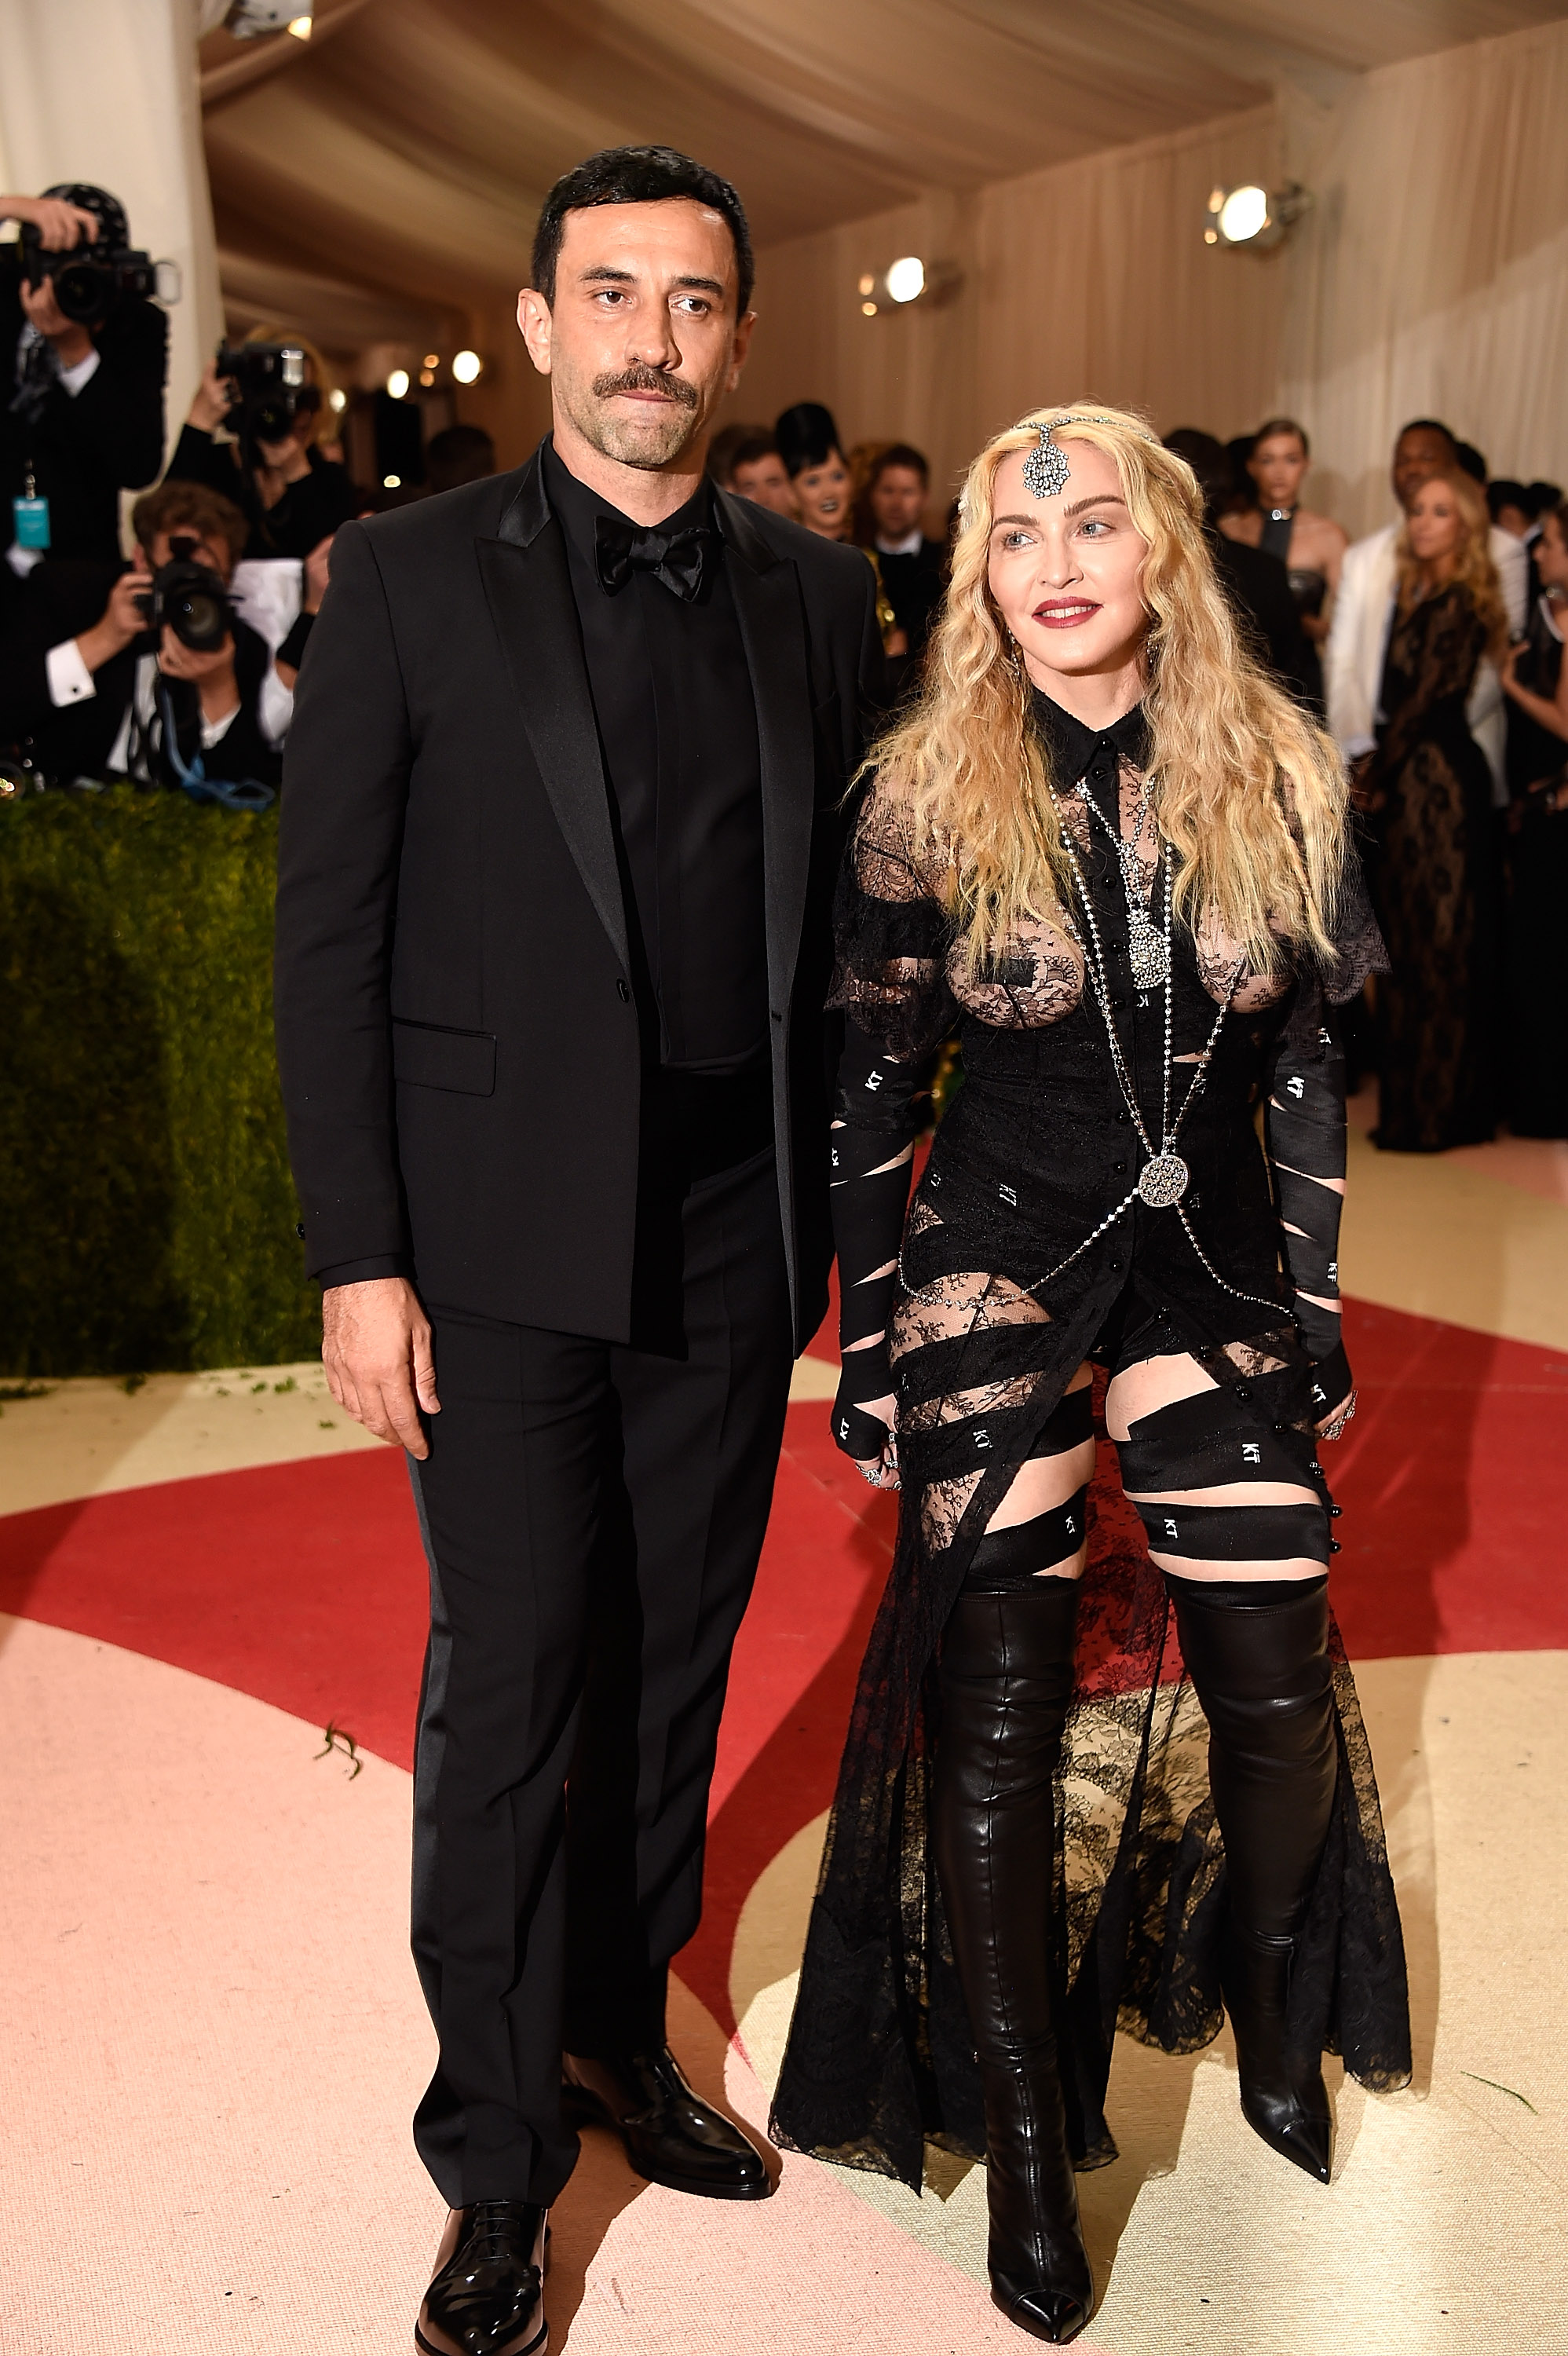 Riccardo Tisci and Madonna attend "Manus x Machina: Fashion In An Age Of Technology" Costume Institute Gala at Metropolitan Museum of Art on May 2, 2016 in New York City.